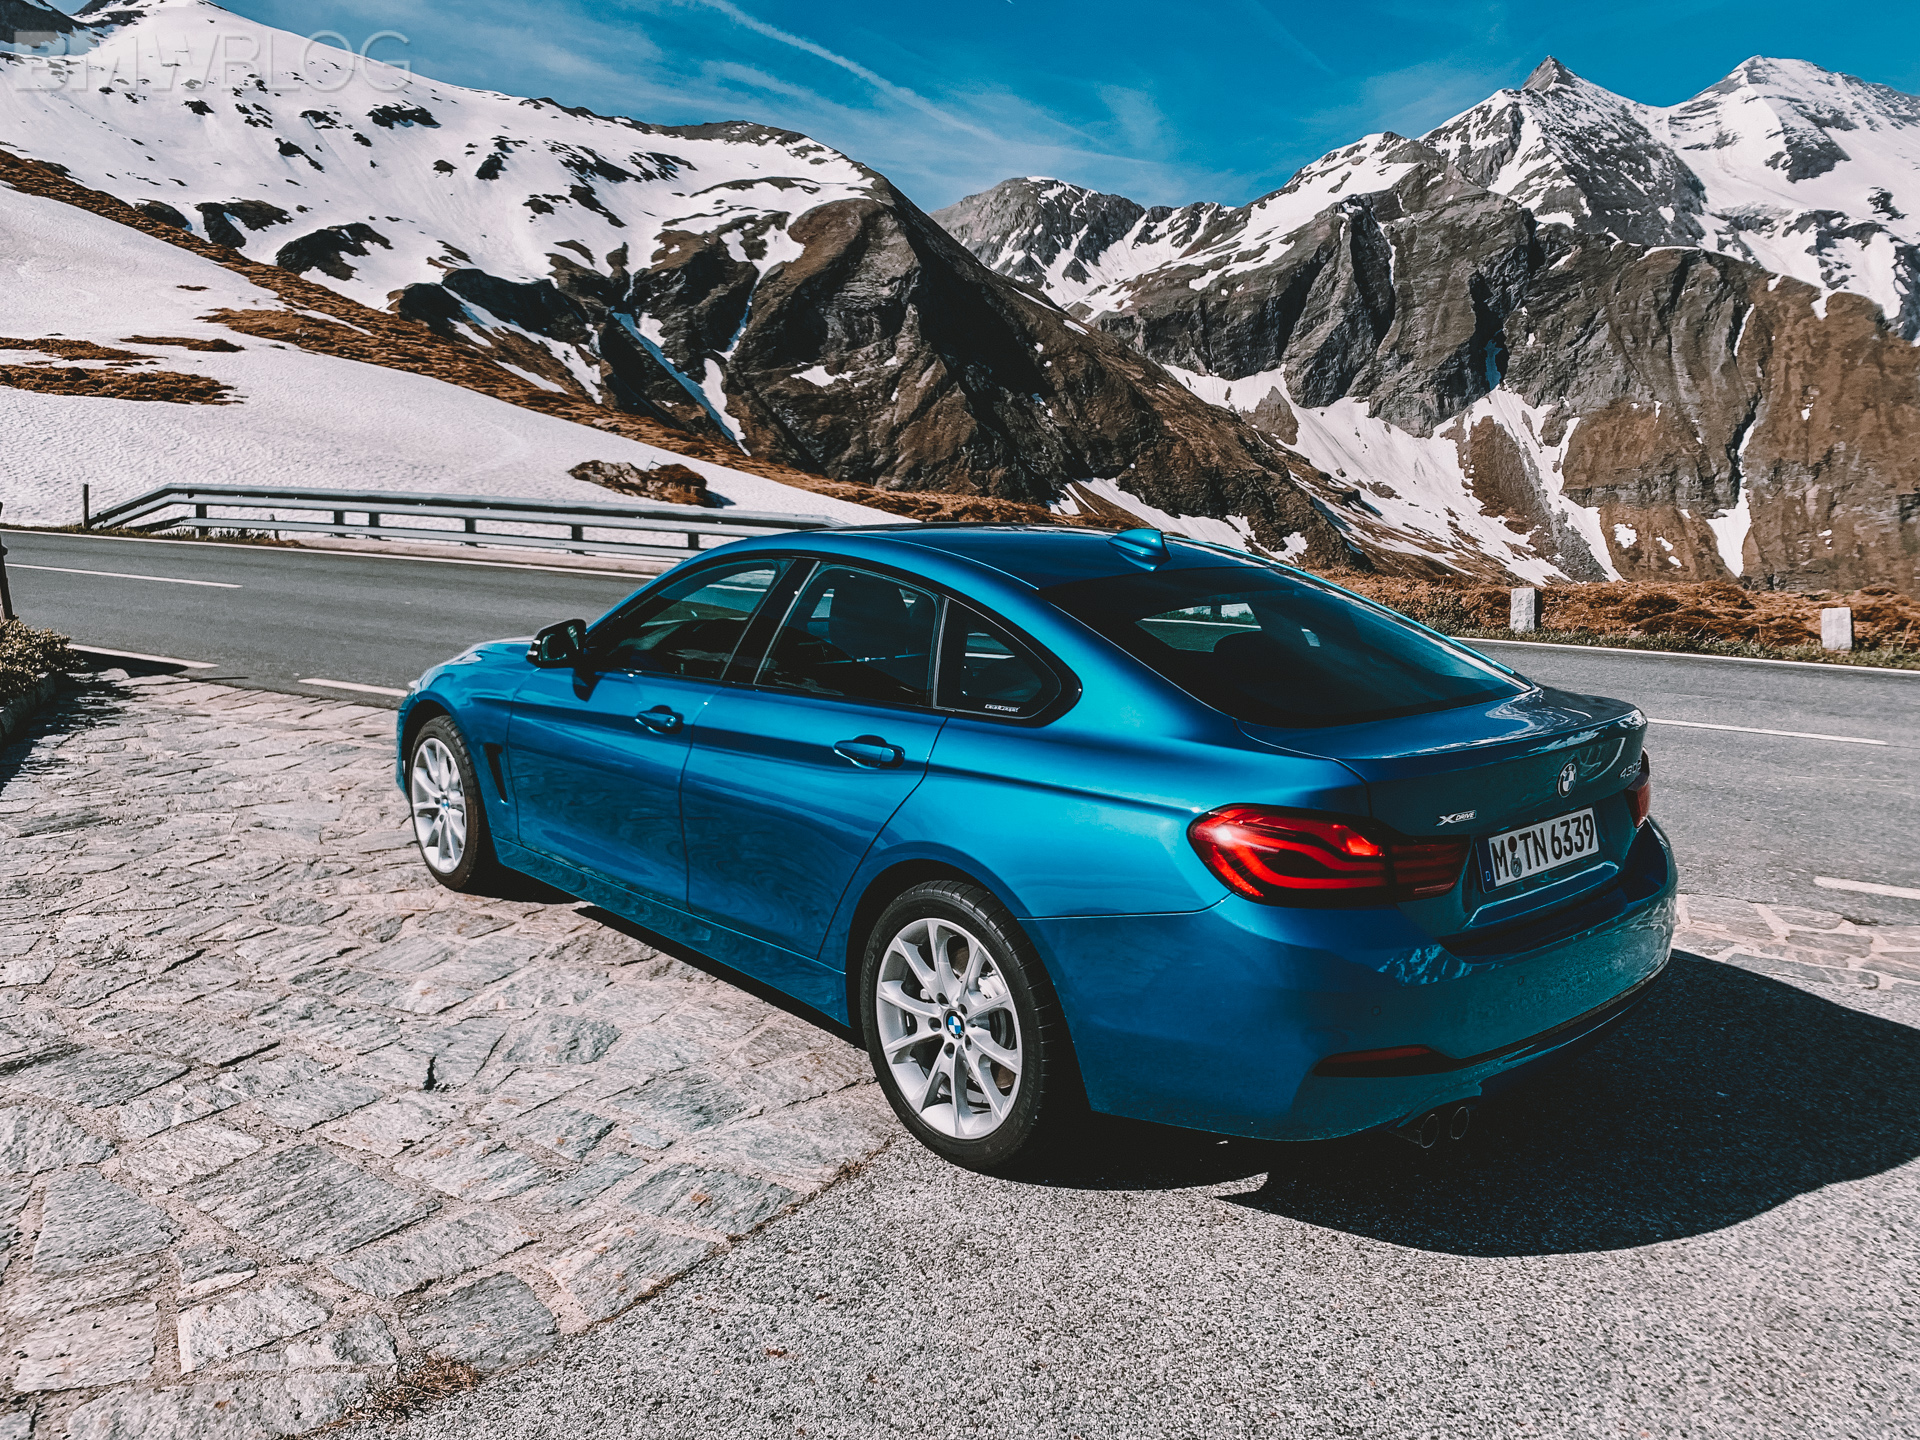 TEST DRIVE: 2019 BMW 430d Gran Coupe - A Wolf In Sheep's Clothing